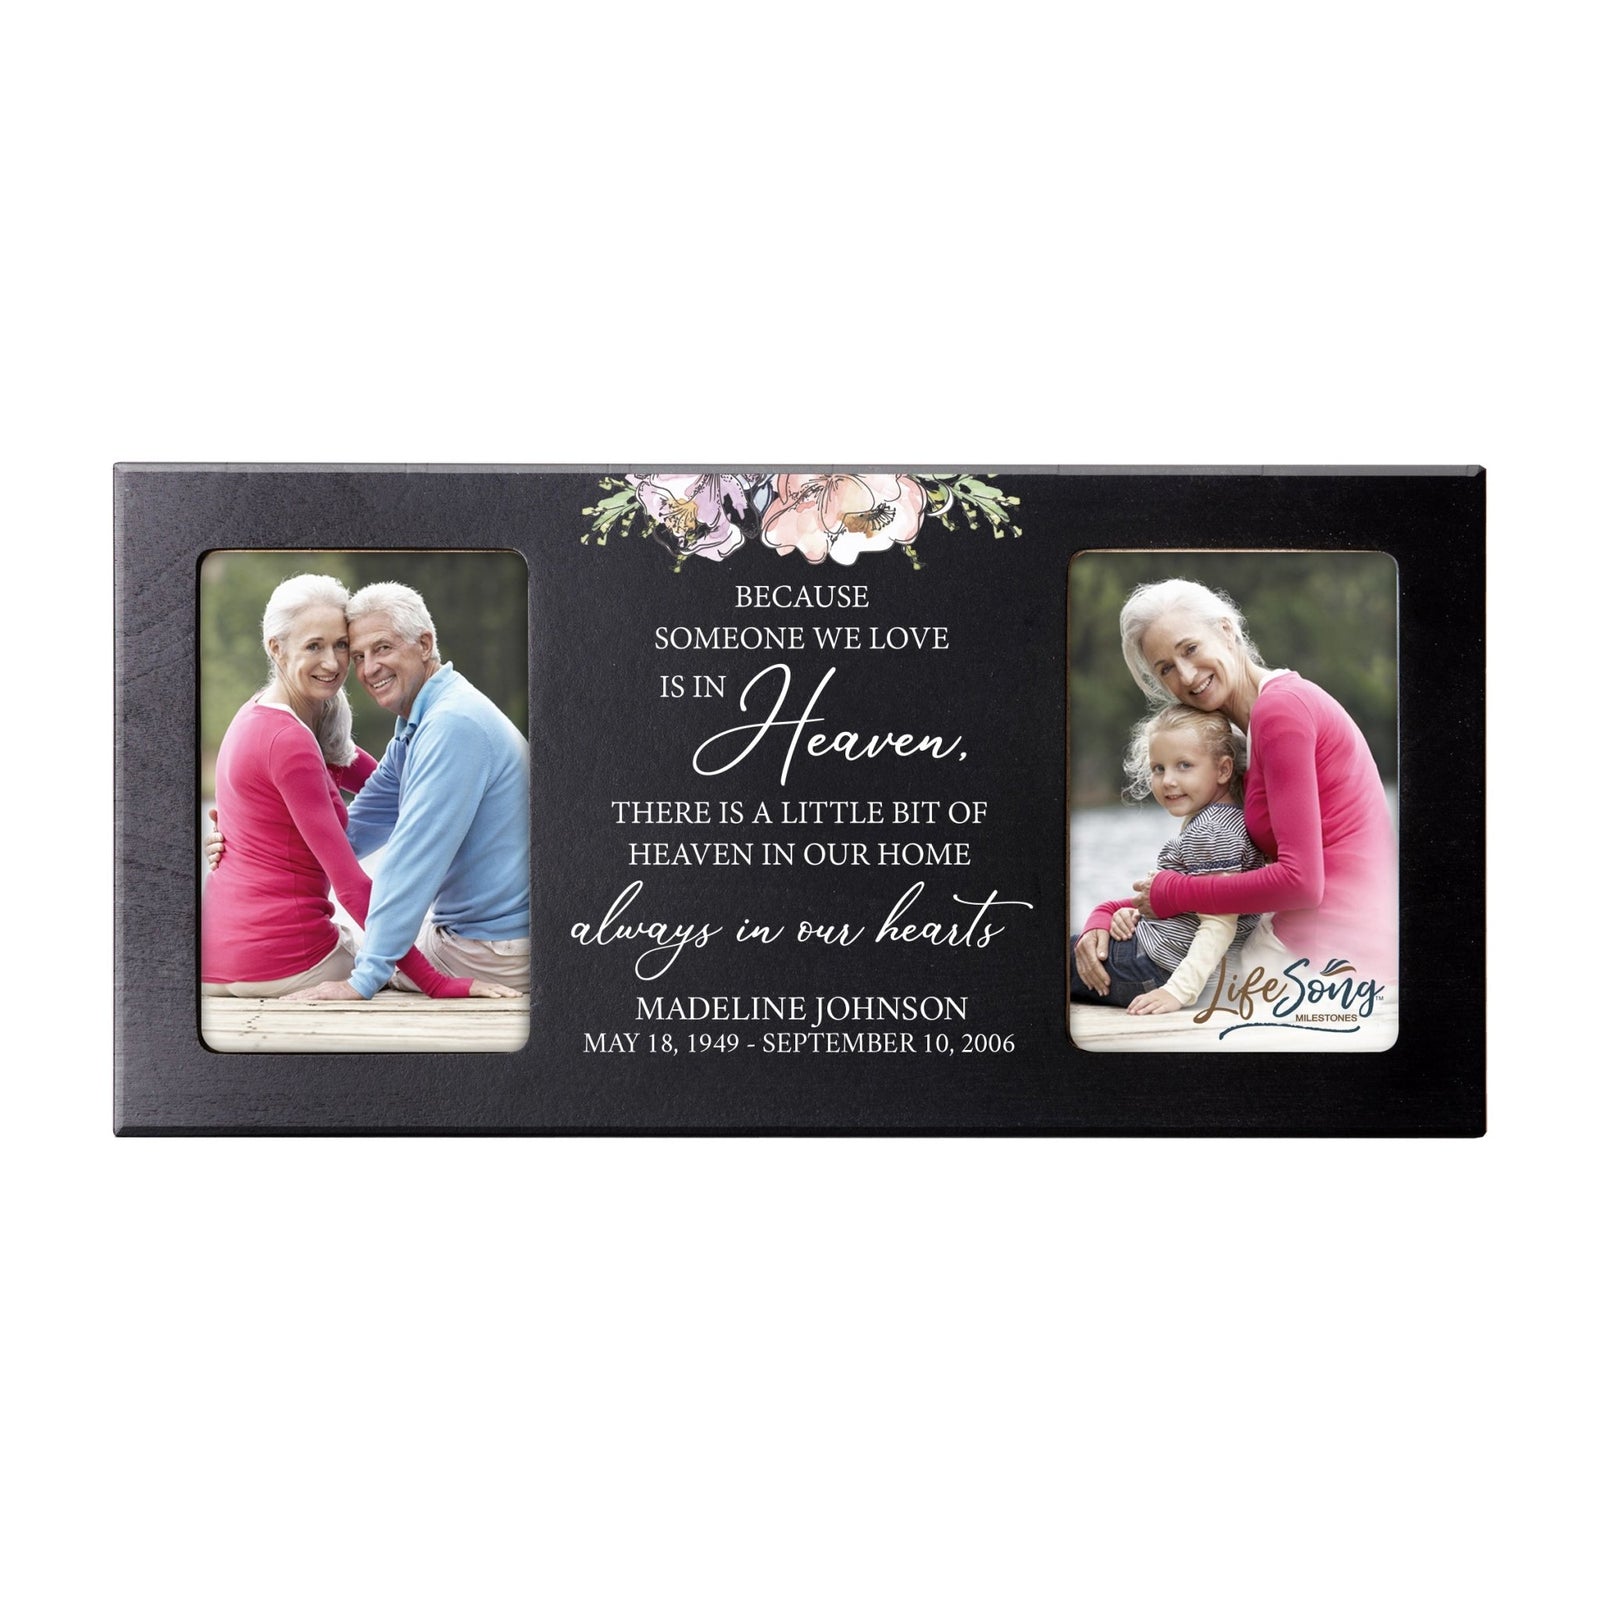 Custom Memorial Picture Frame 16x8in Holds Two 4x6in Photos - Heaven In Our Home - LifeSong Milestones